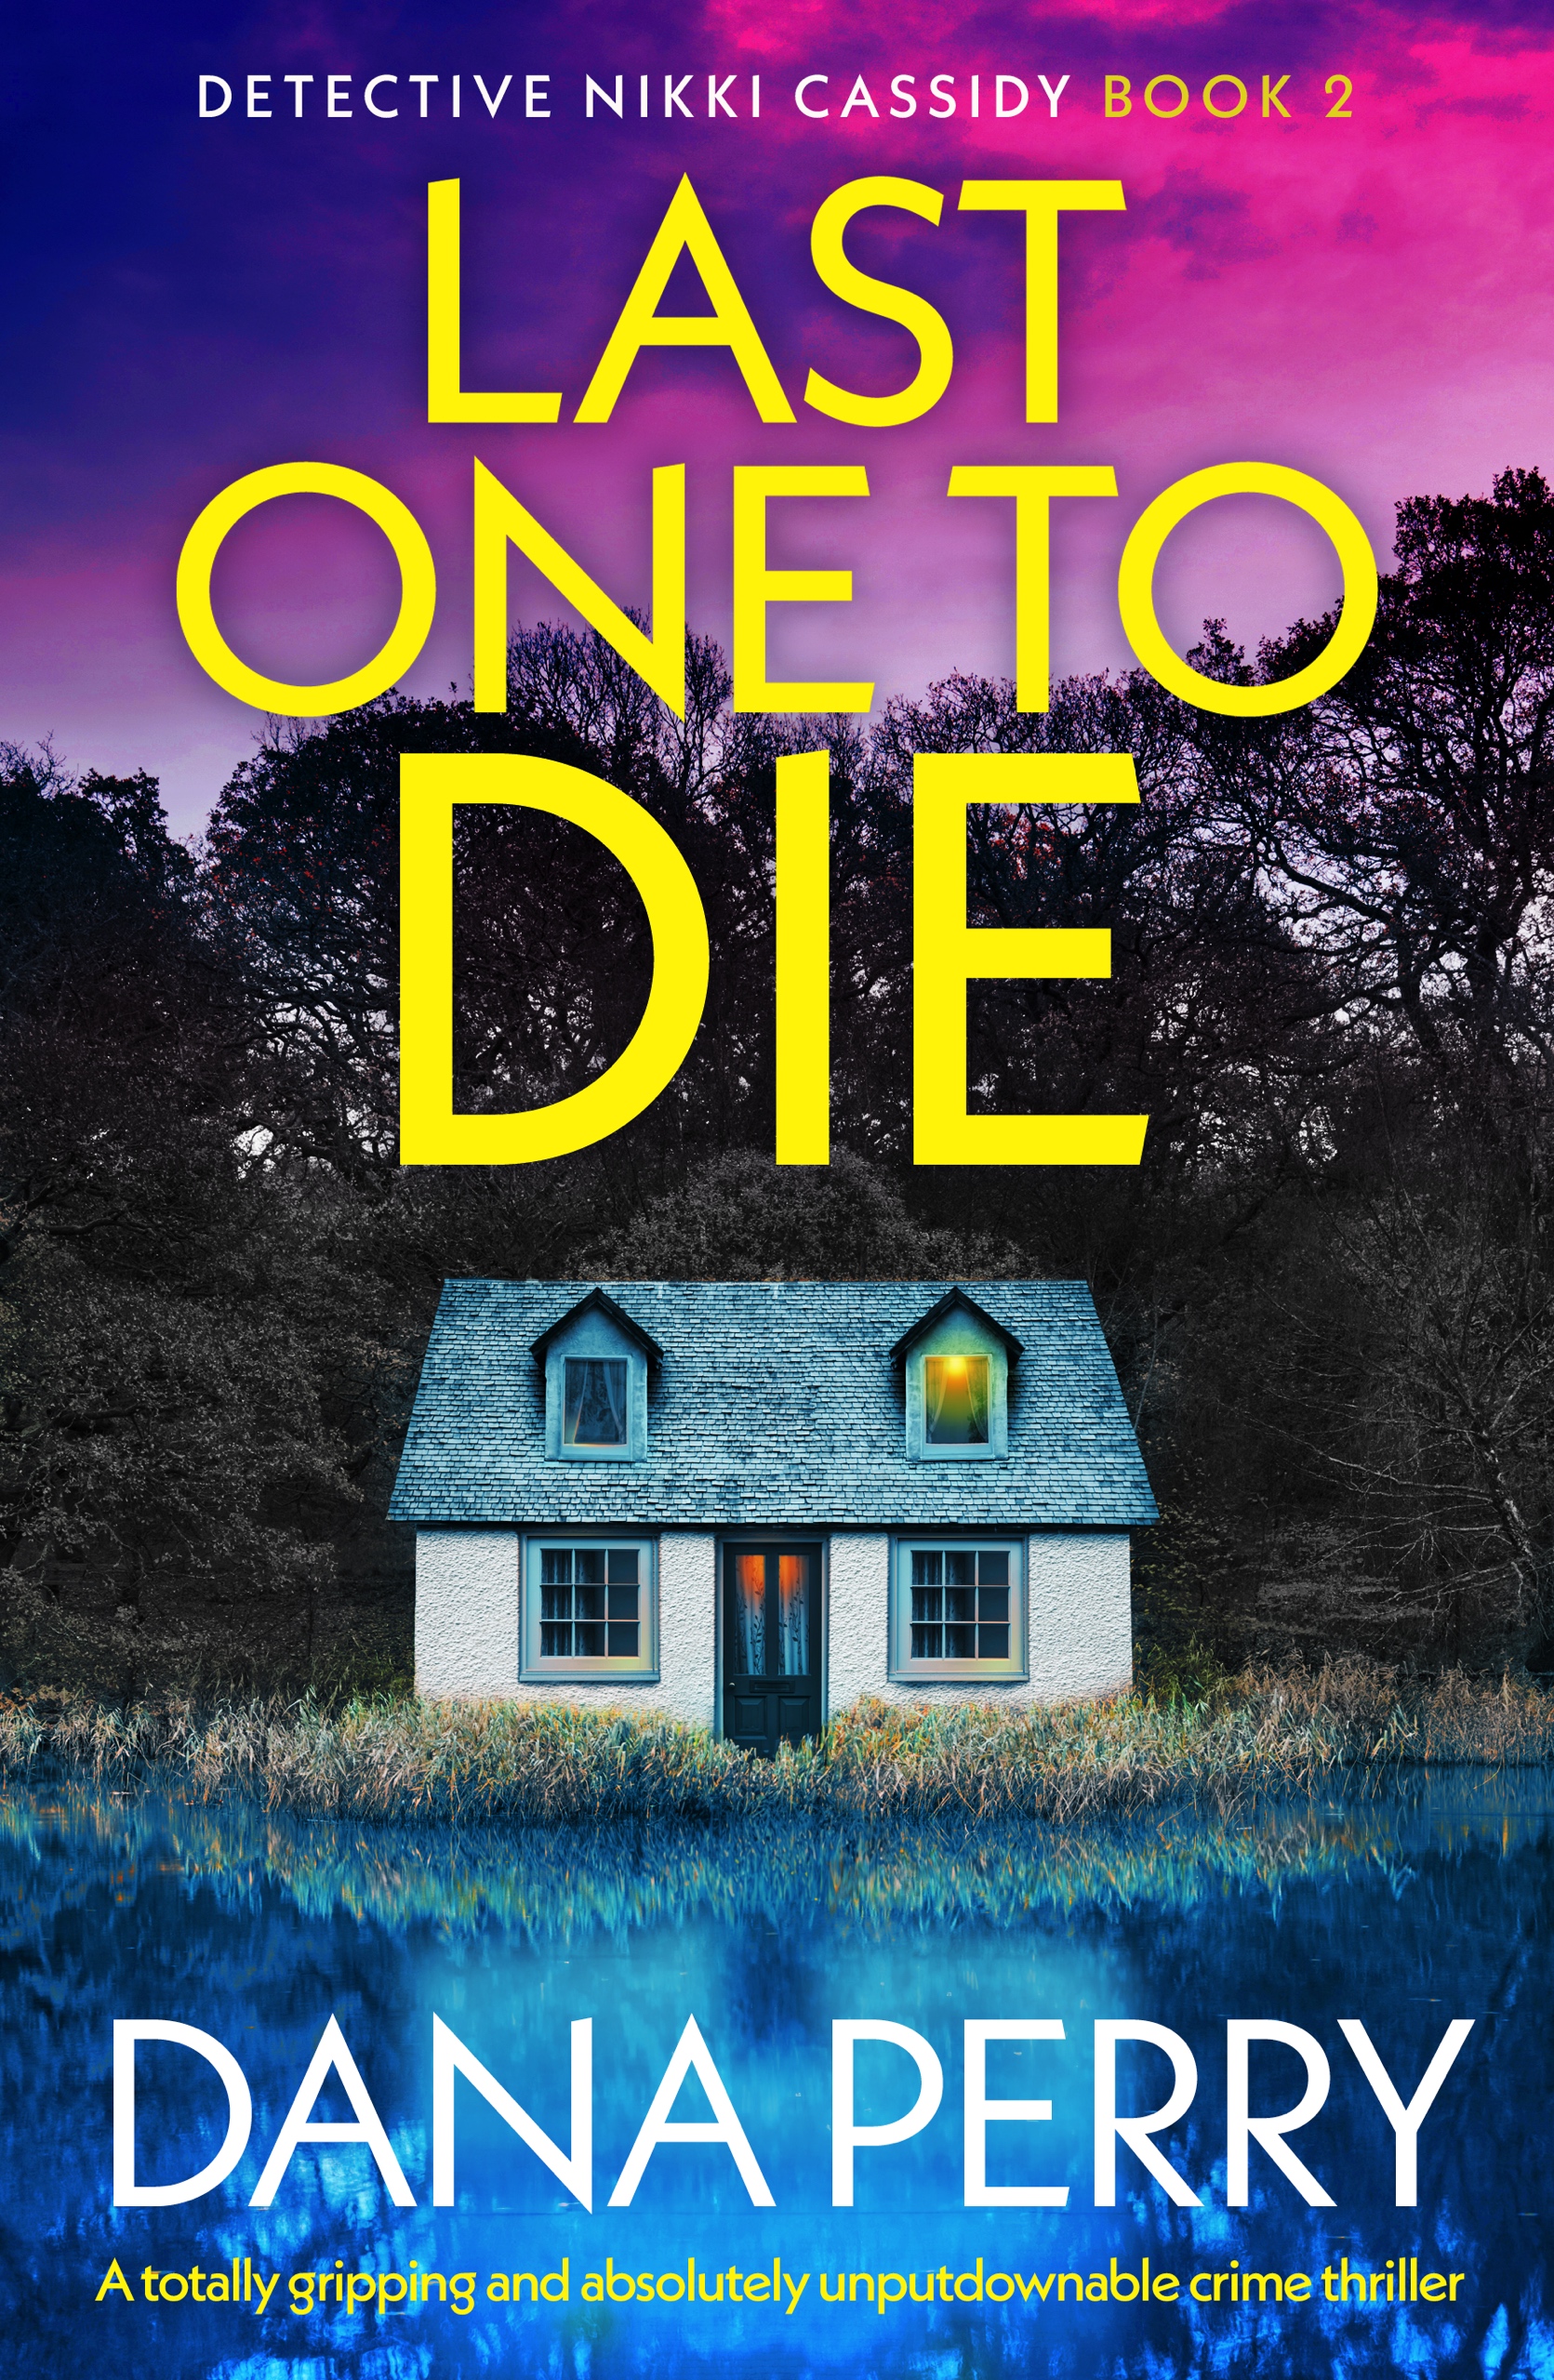 LAST ONE TO DIE by Dana Perry